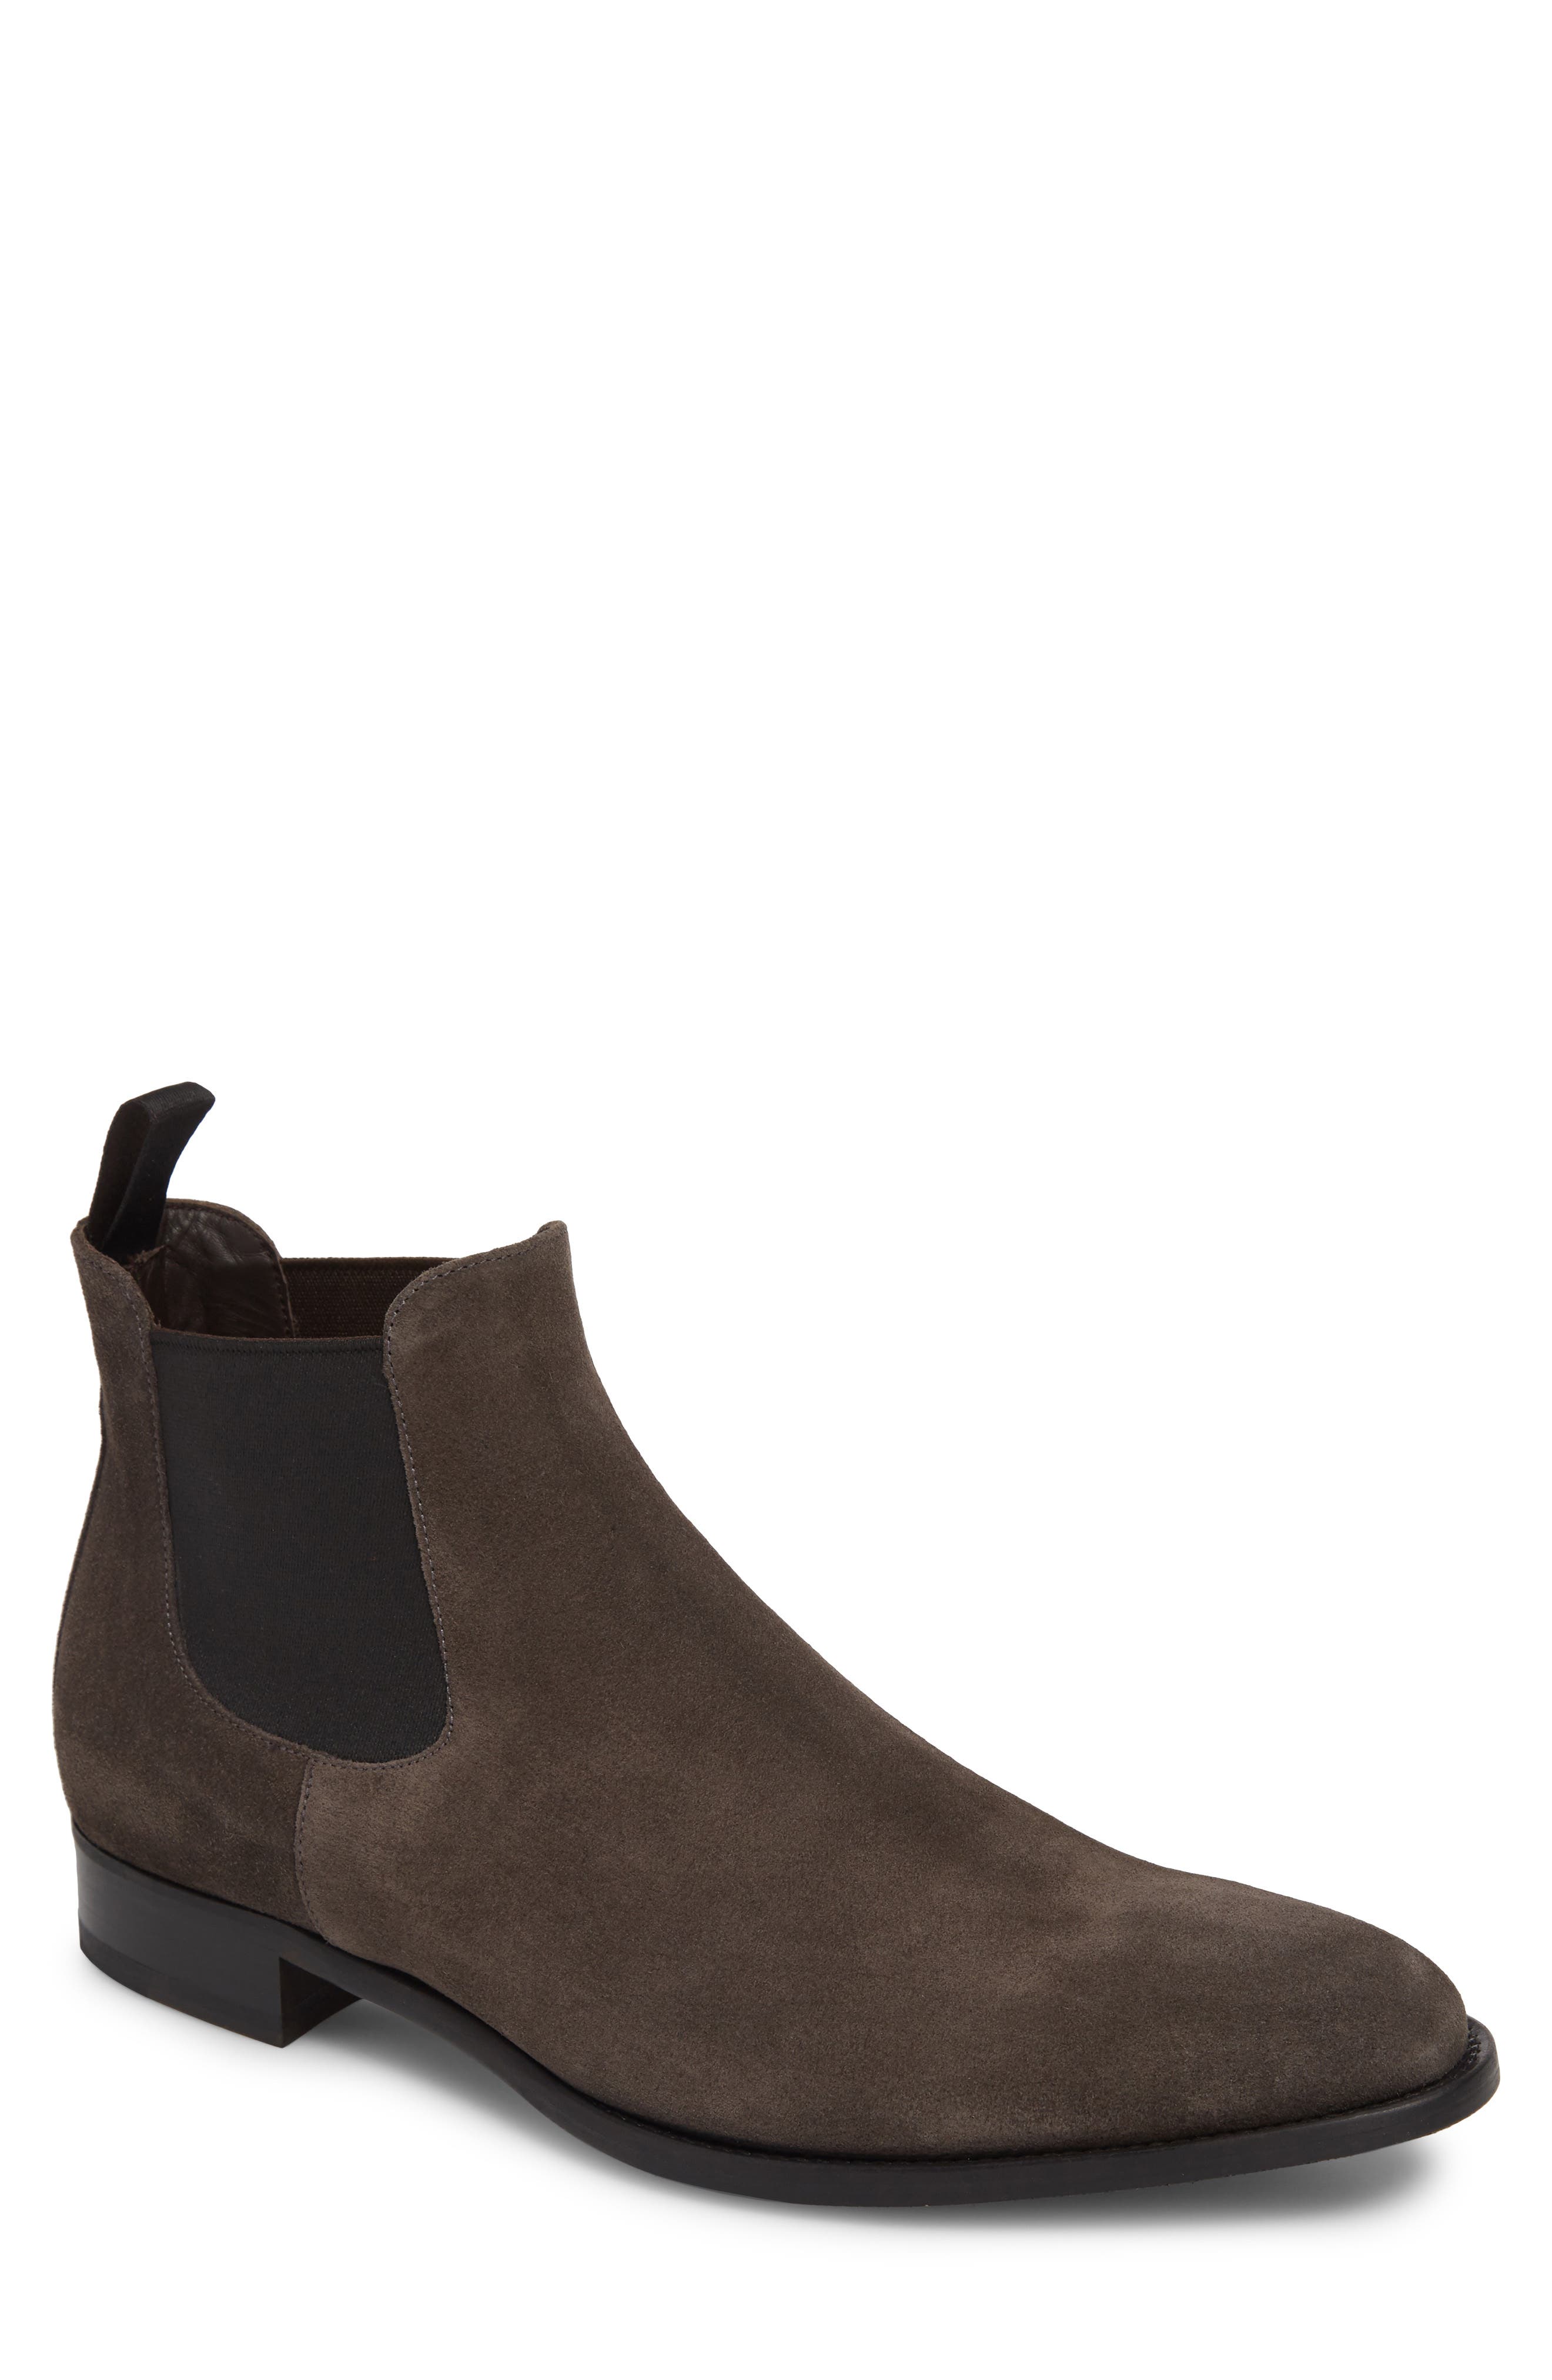 almond toe chelsea boots mens